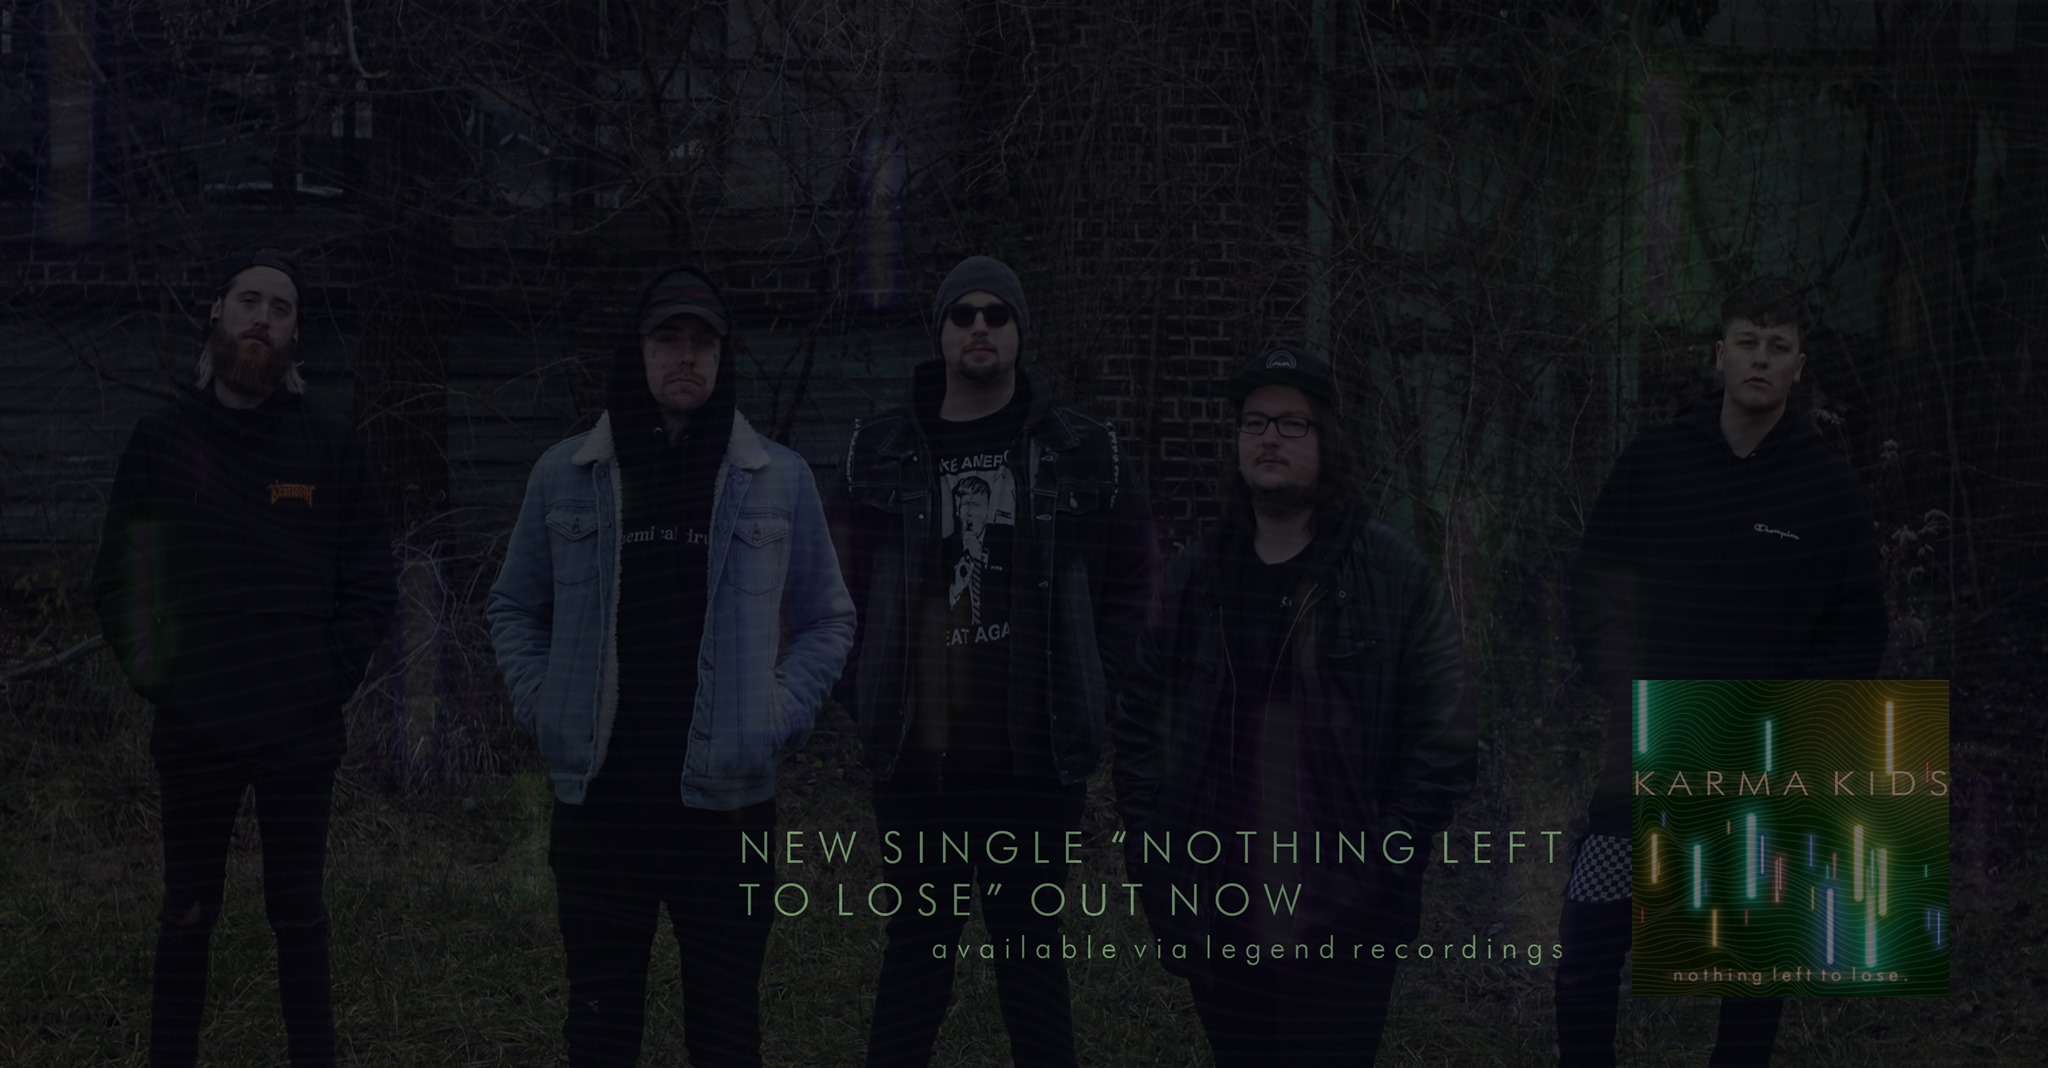 Karma Kids have been hard at work, spending most of 2020 in the studio and preparing for their album ‘Vibes’; they’ve released their latest single ‘Nothing Left To Lose’